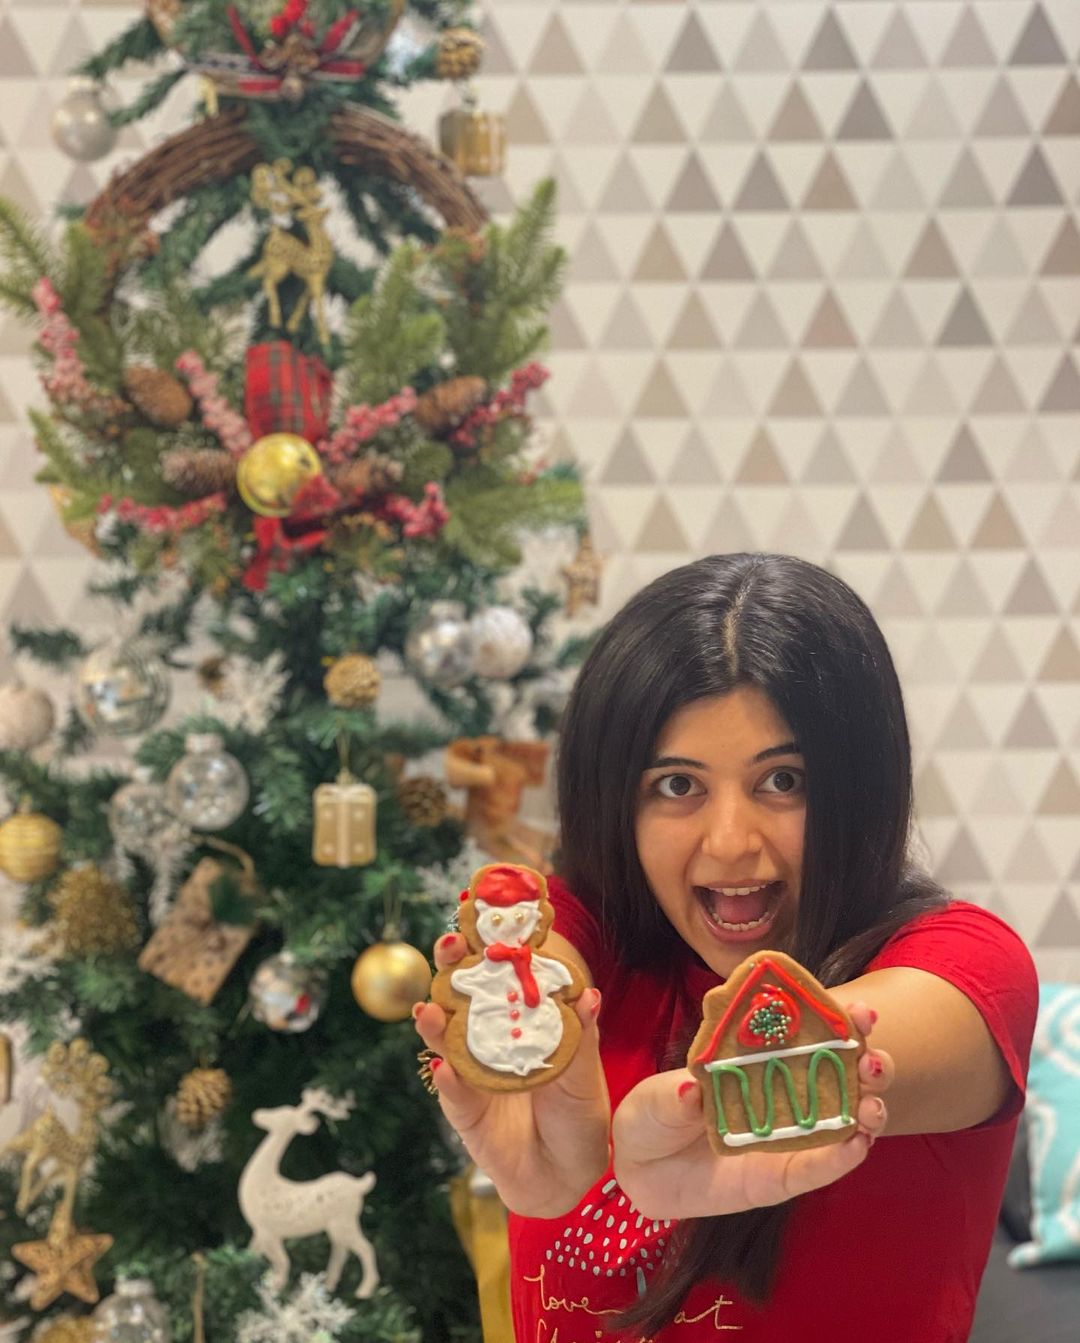 Actress Yesha Rughani Celebrated Christmas Adorably With Special Cookies And Decorated Christmas Tree